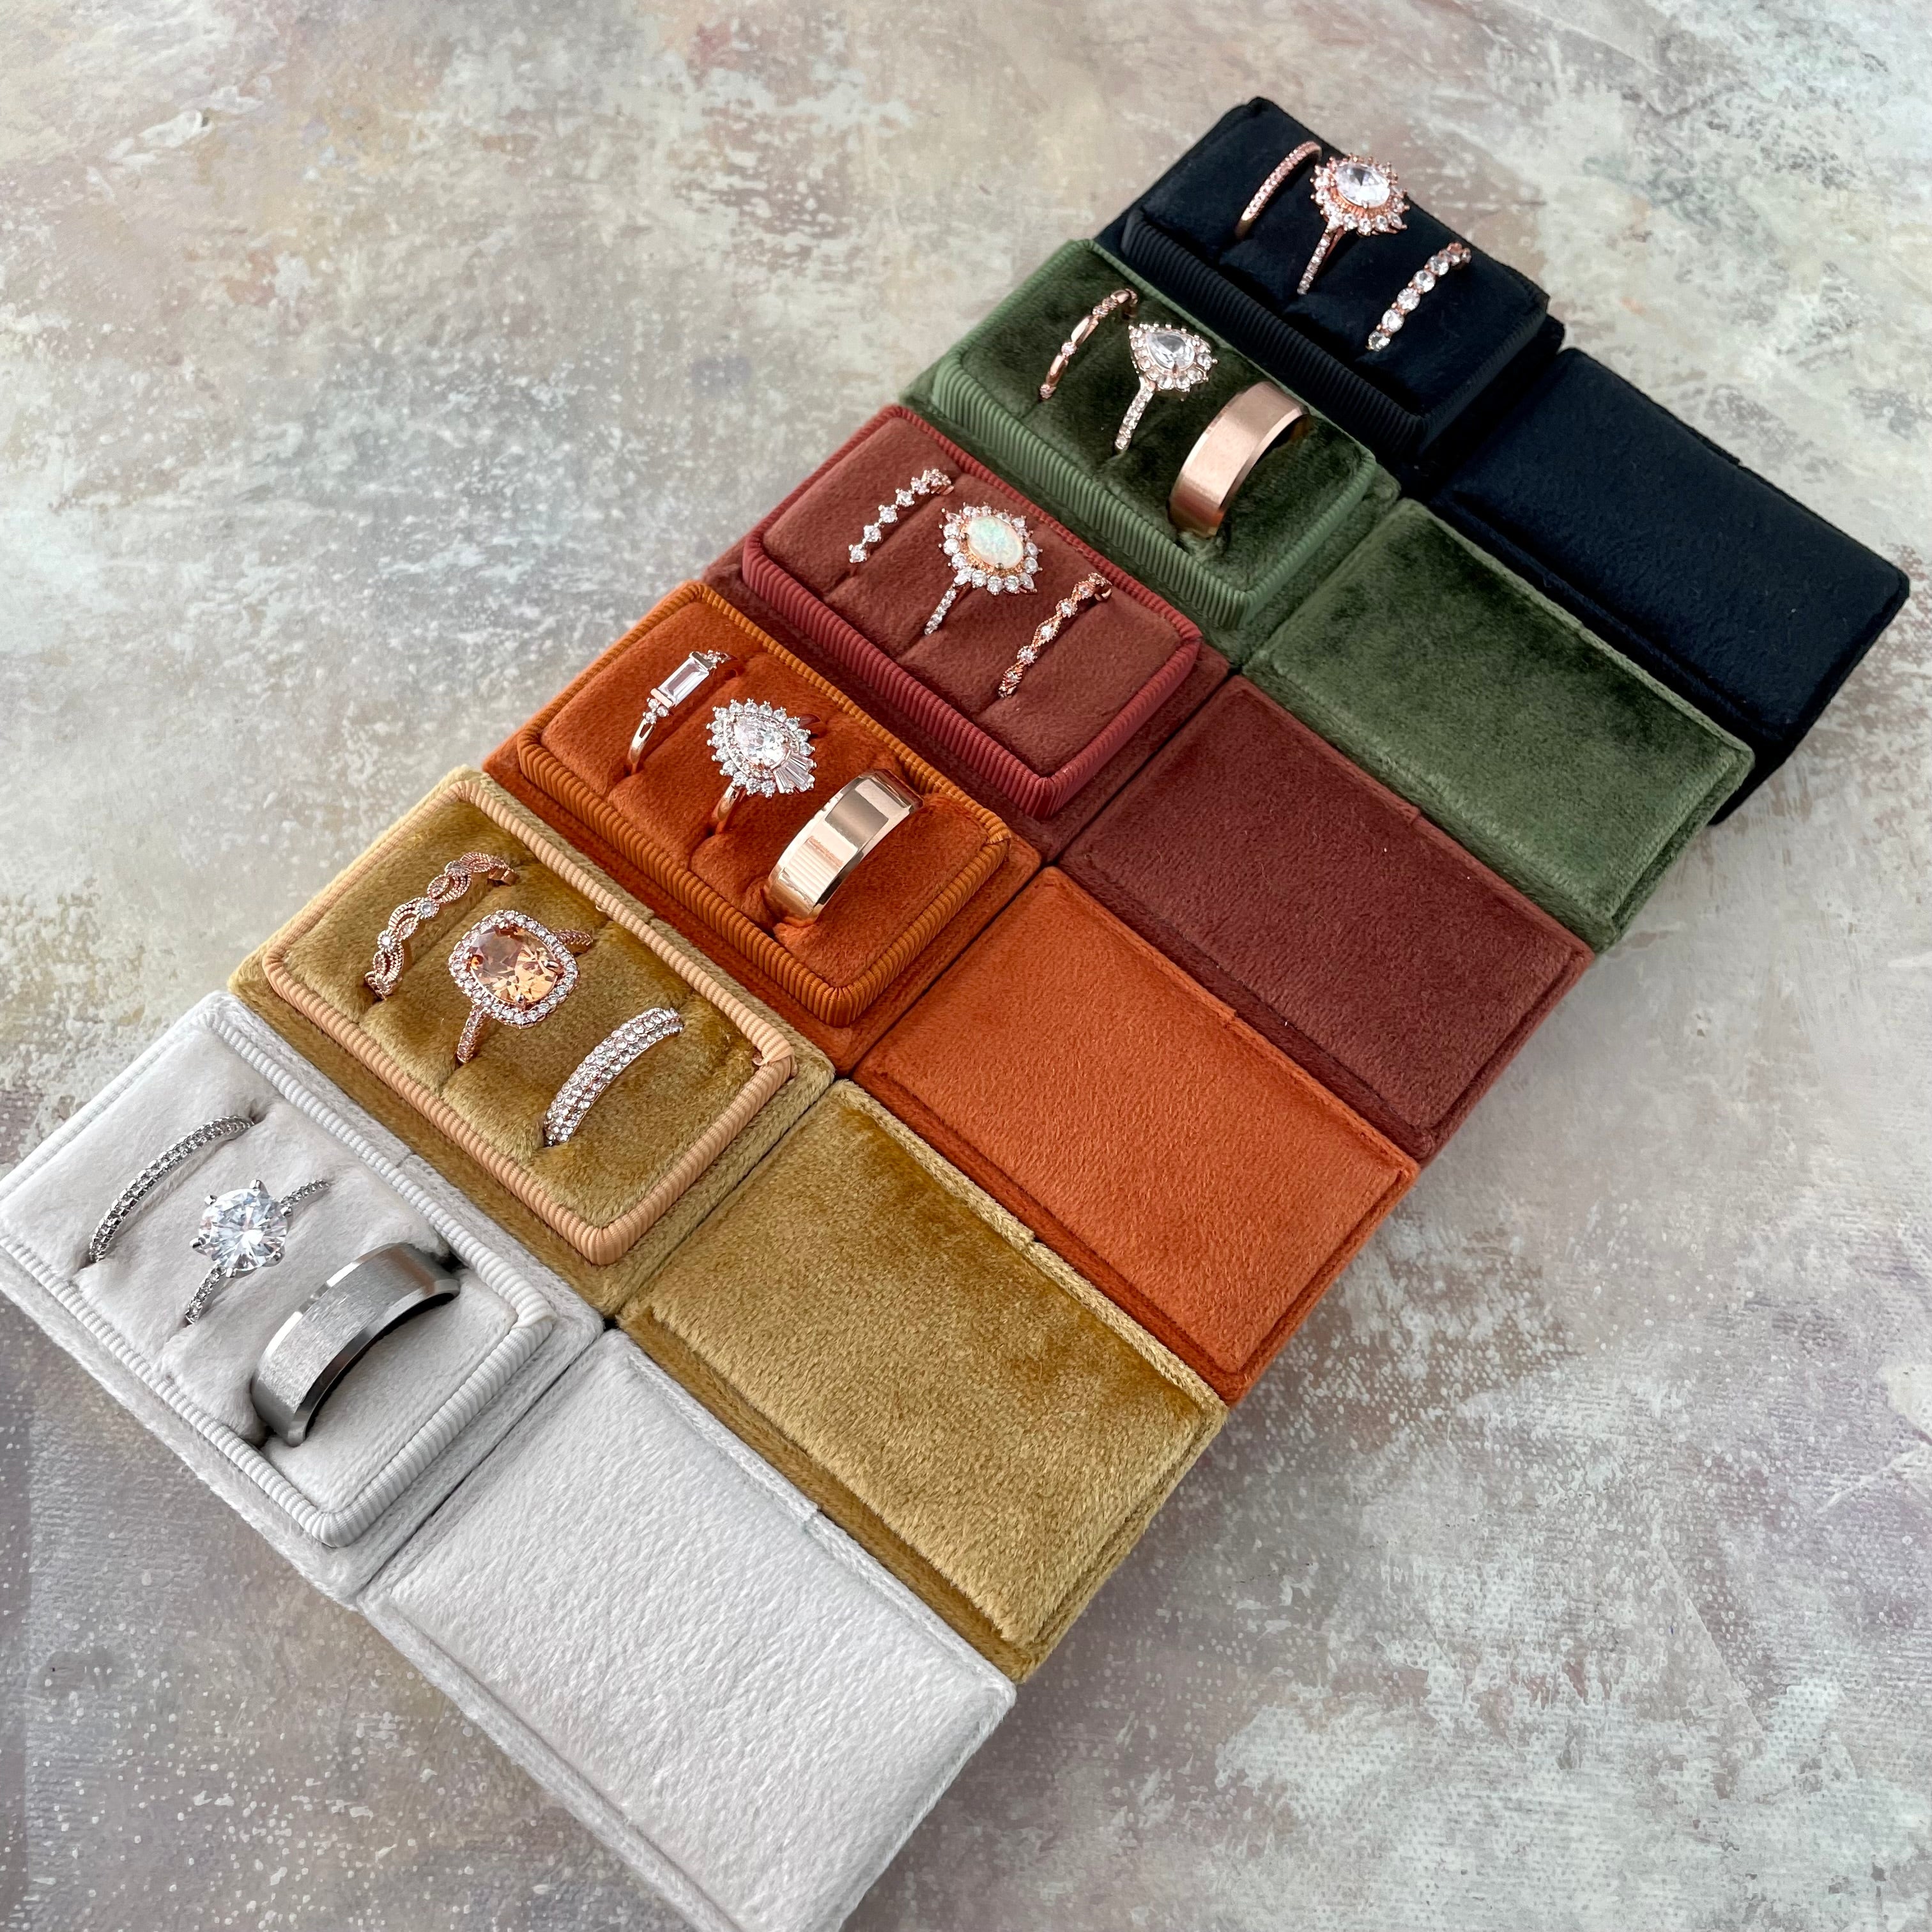 Variety of colored triple slot ring boxes - diamond white, gold, burnt orange, rust, olive green, black - Wedding Flat lay props from Champagne & GRIT